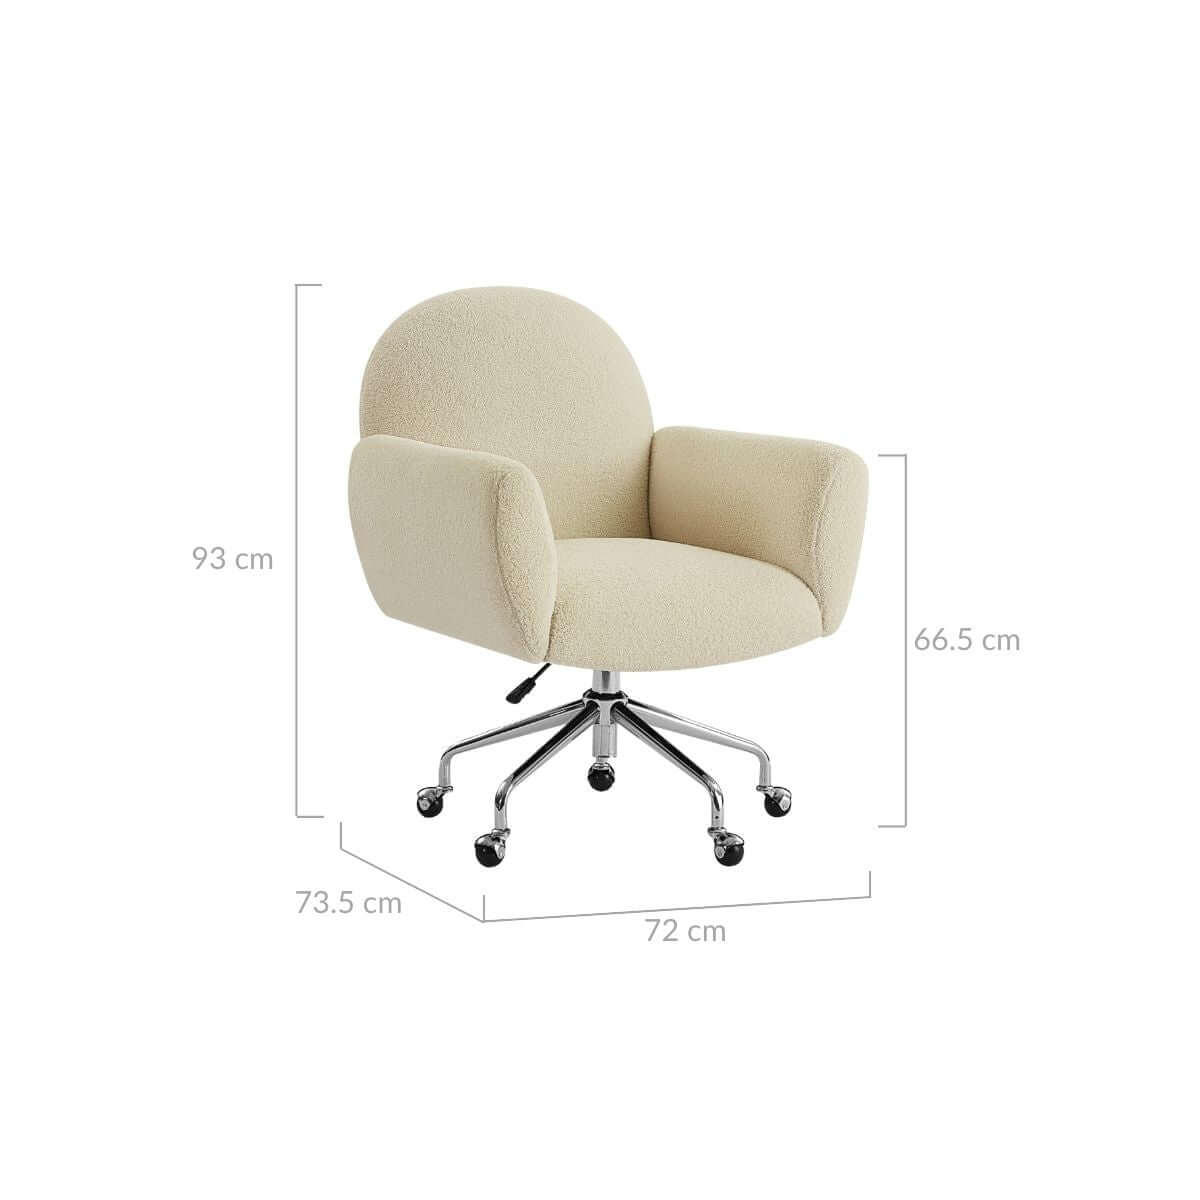 Lacey Office Chair-Upinteriors